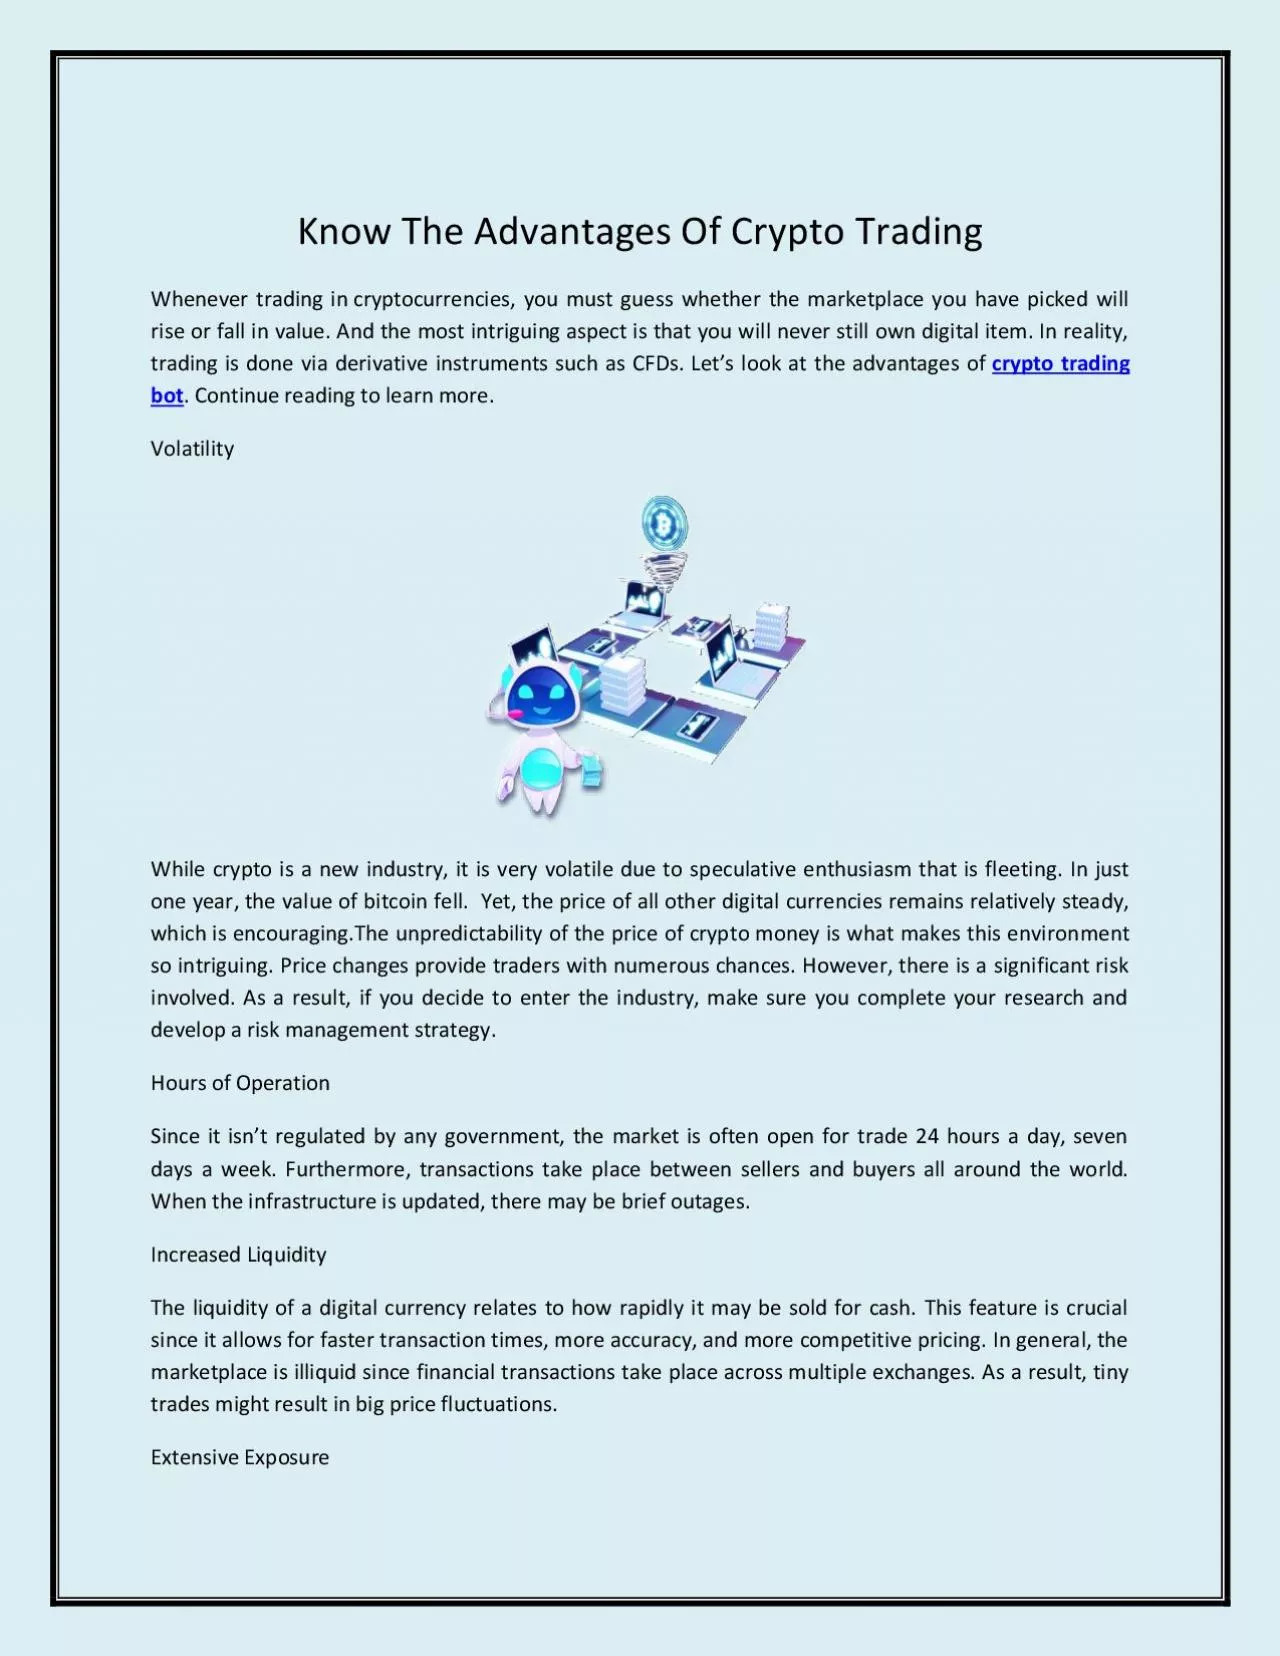 Know The Advantages of Crypto Trading